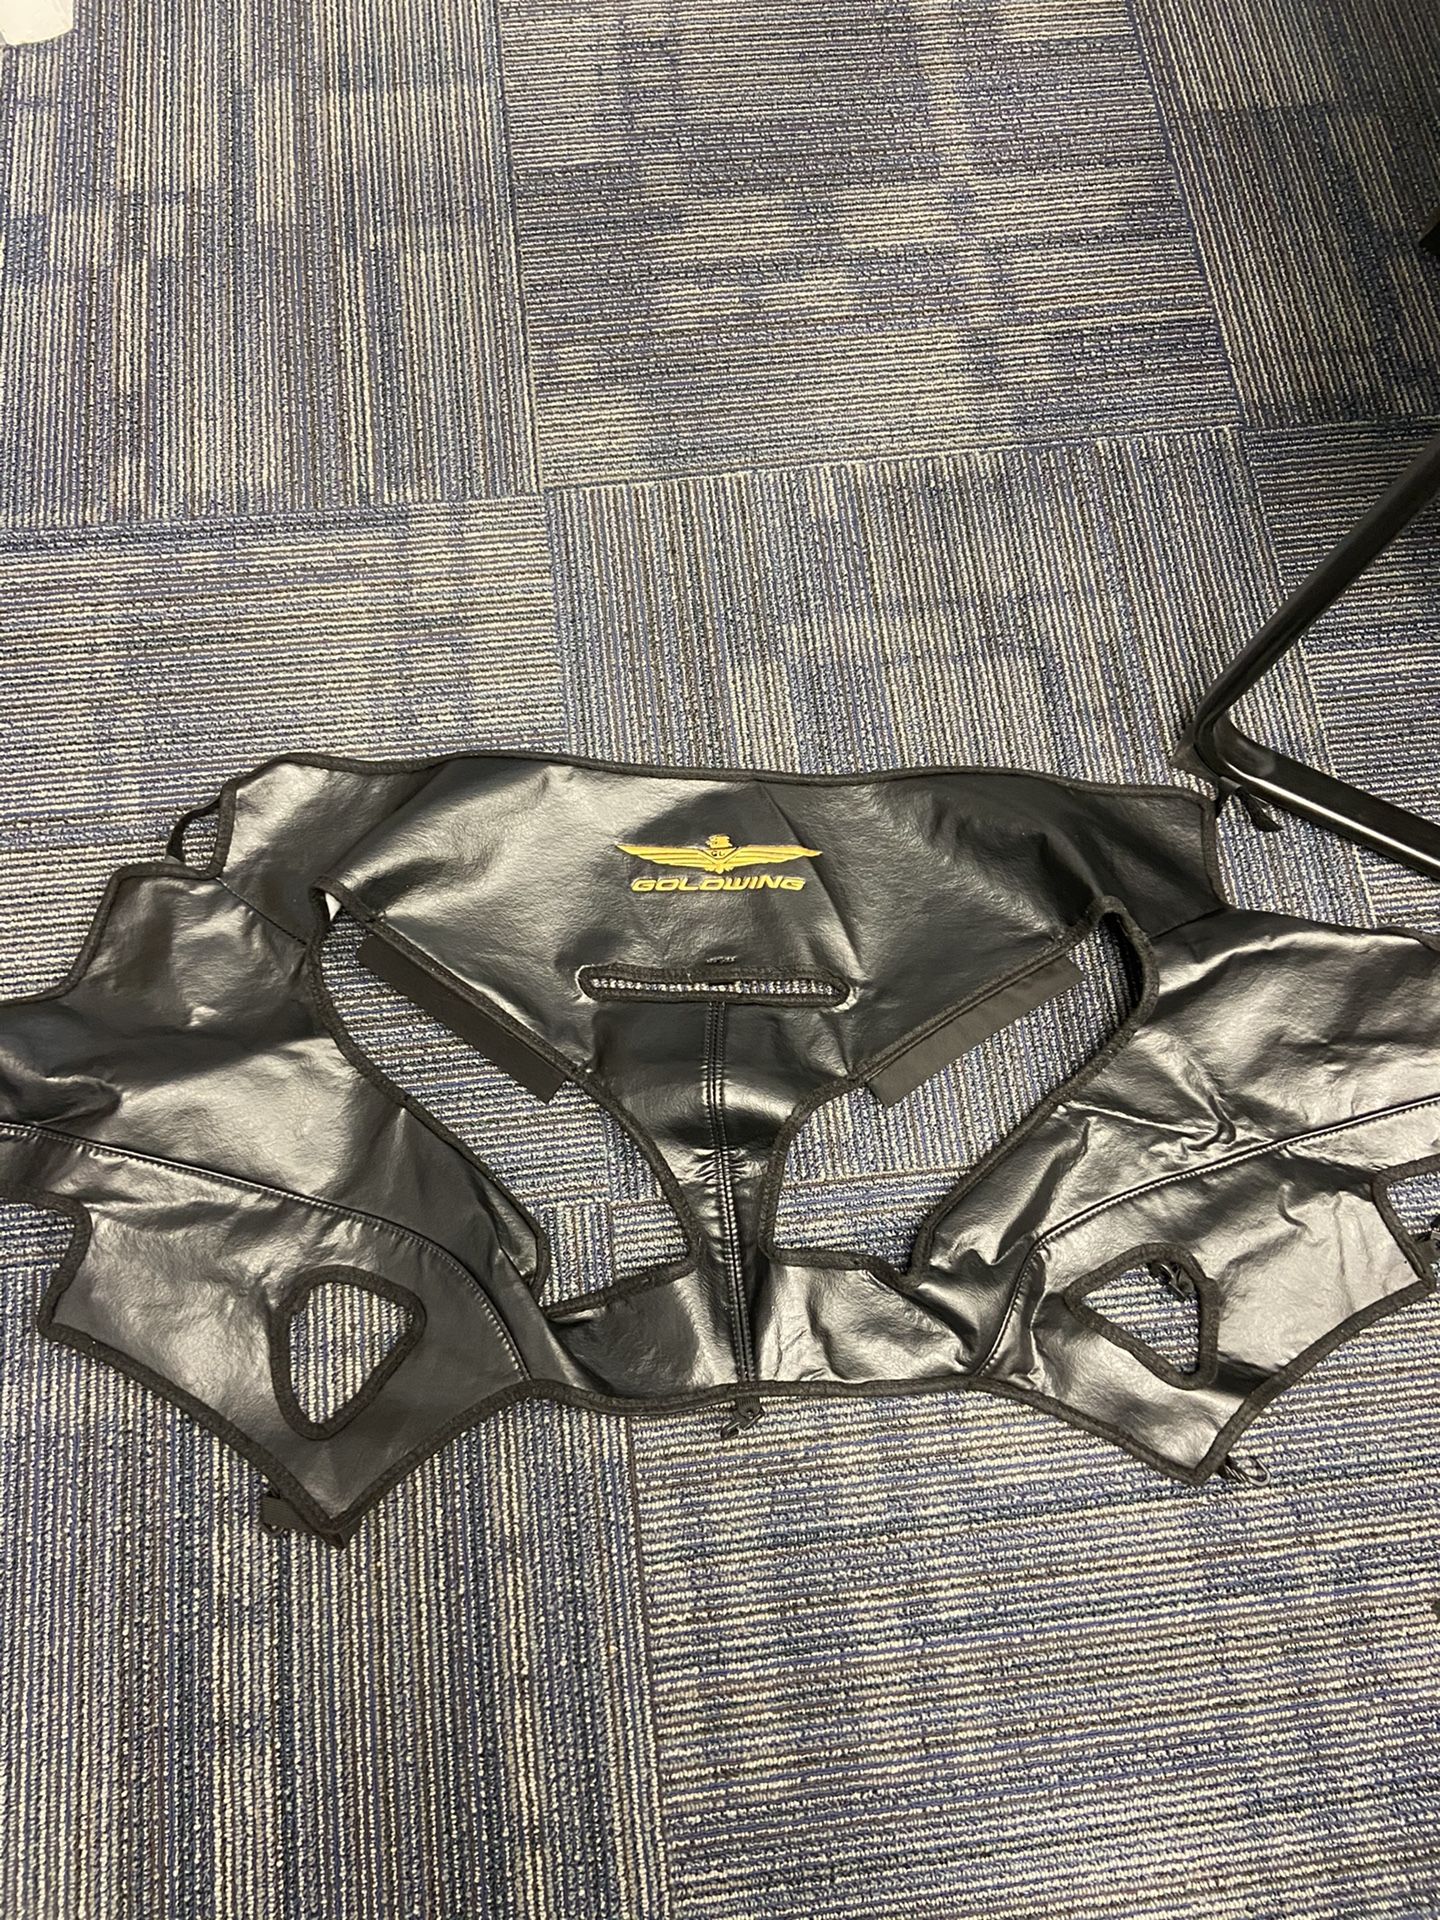 Honda Gold Wind front bra (new condition)